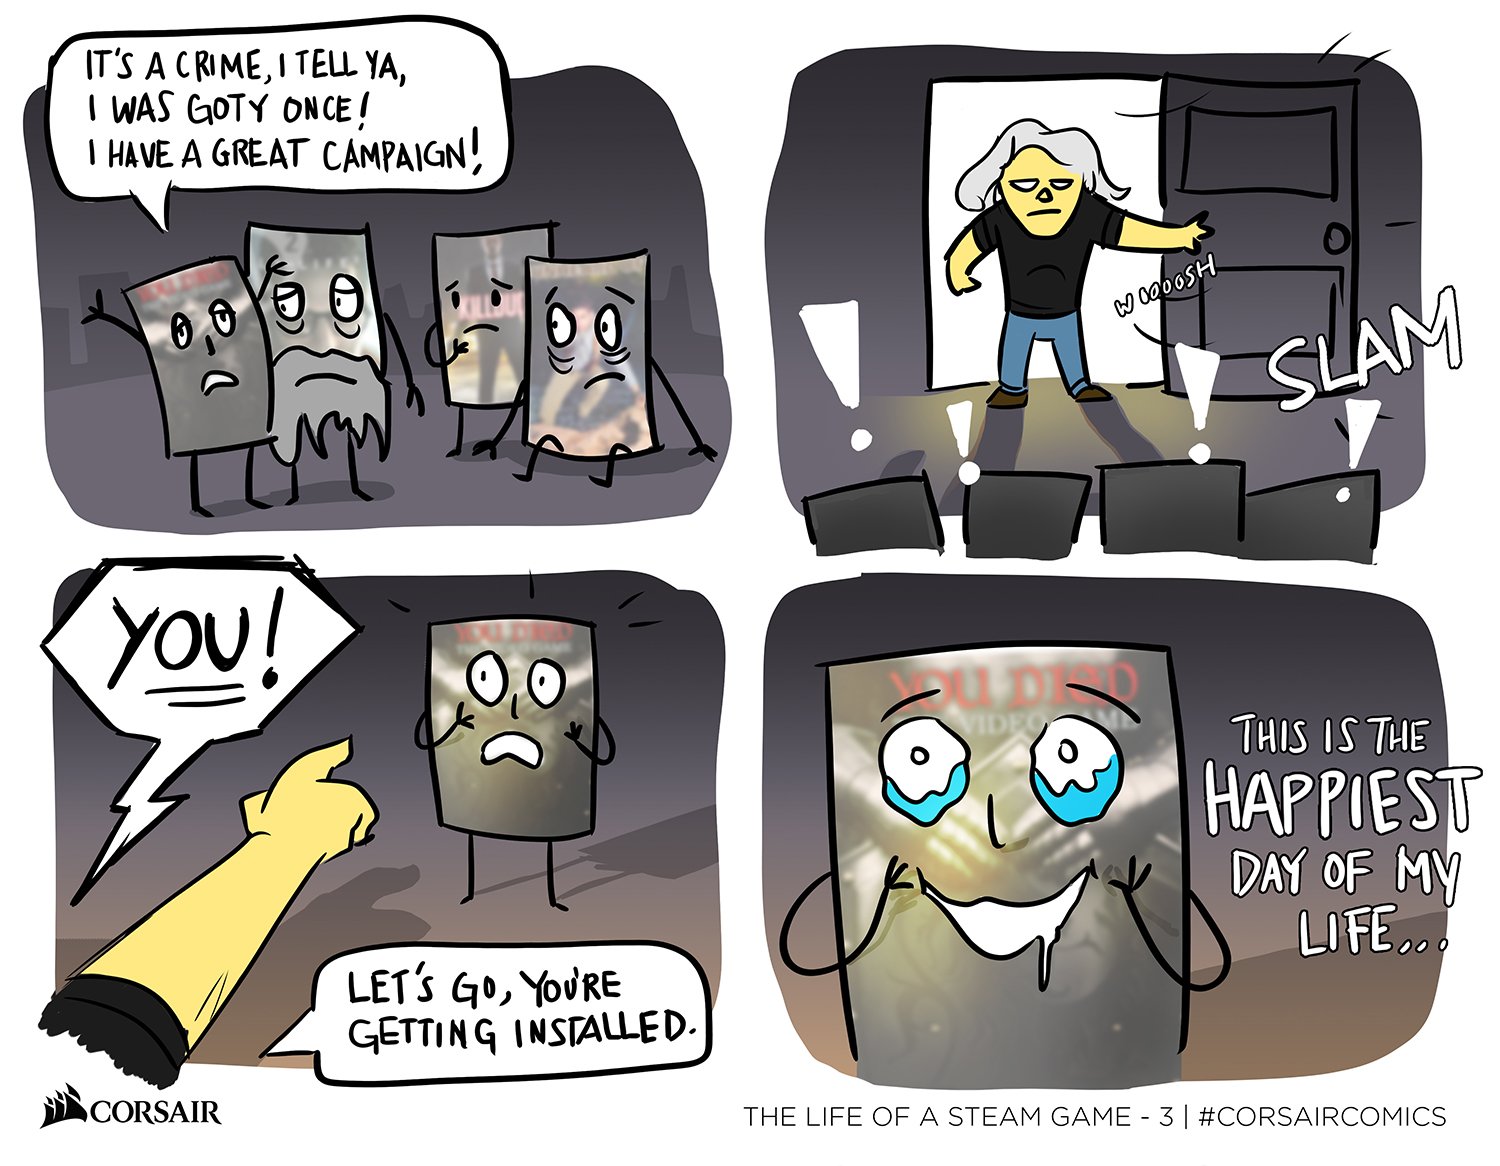 Corsair How A Game From Your Steam Library Feels When You Finally Decide To Install It Corsaircomics